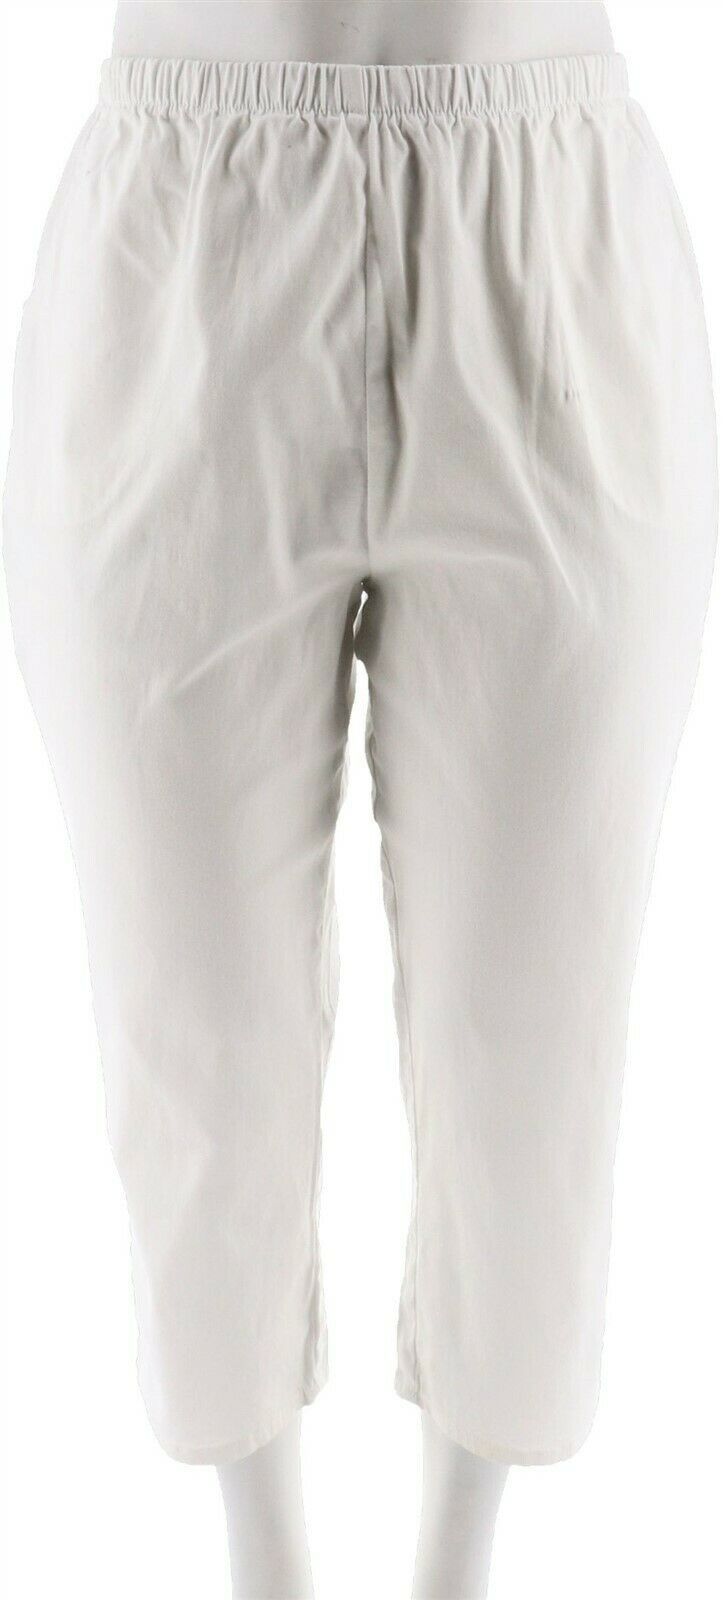 Denim & Co Stretch Comfy Cropped Pants 2-Side Pockets Solid White S NEW A14925